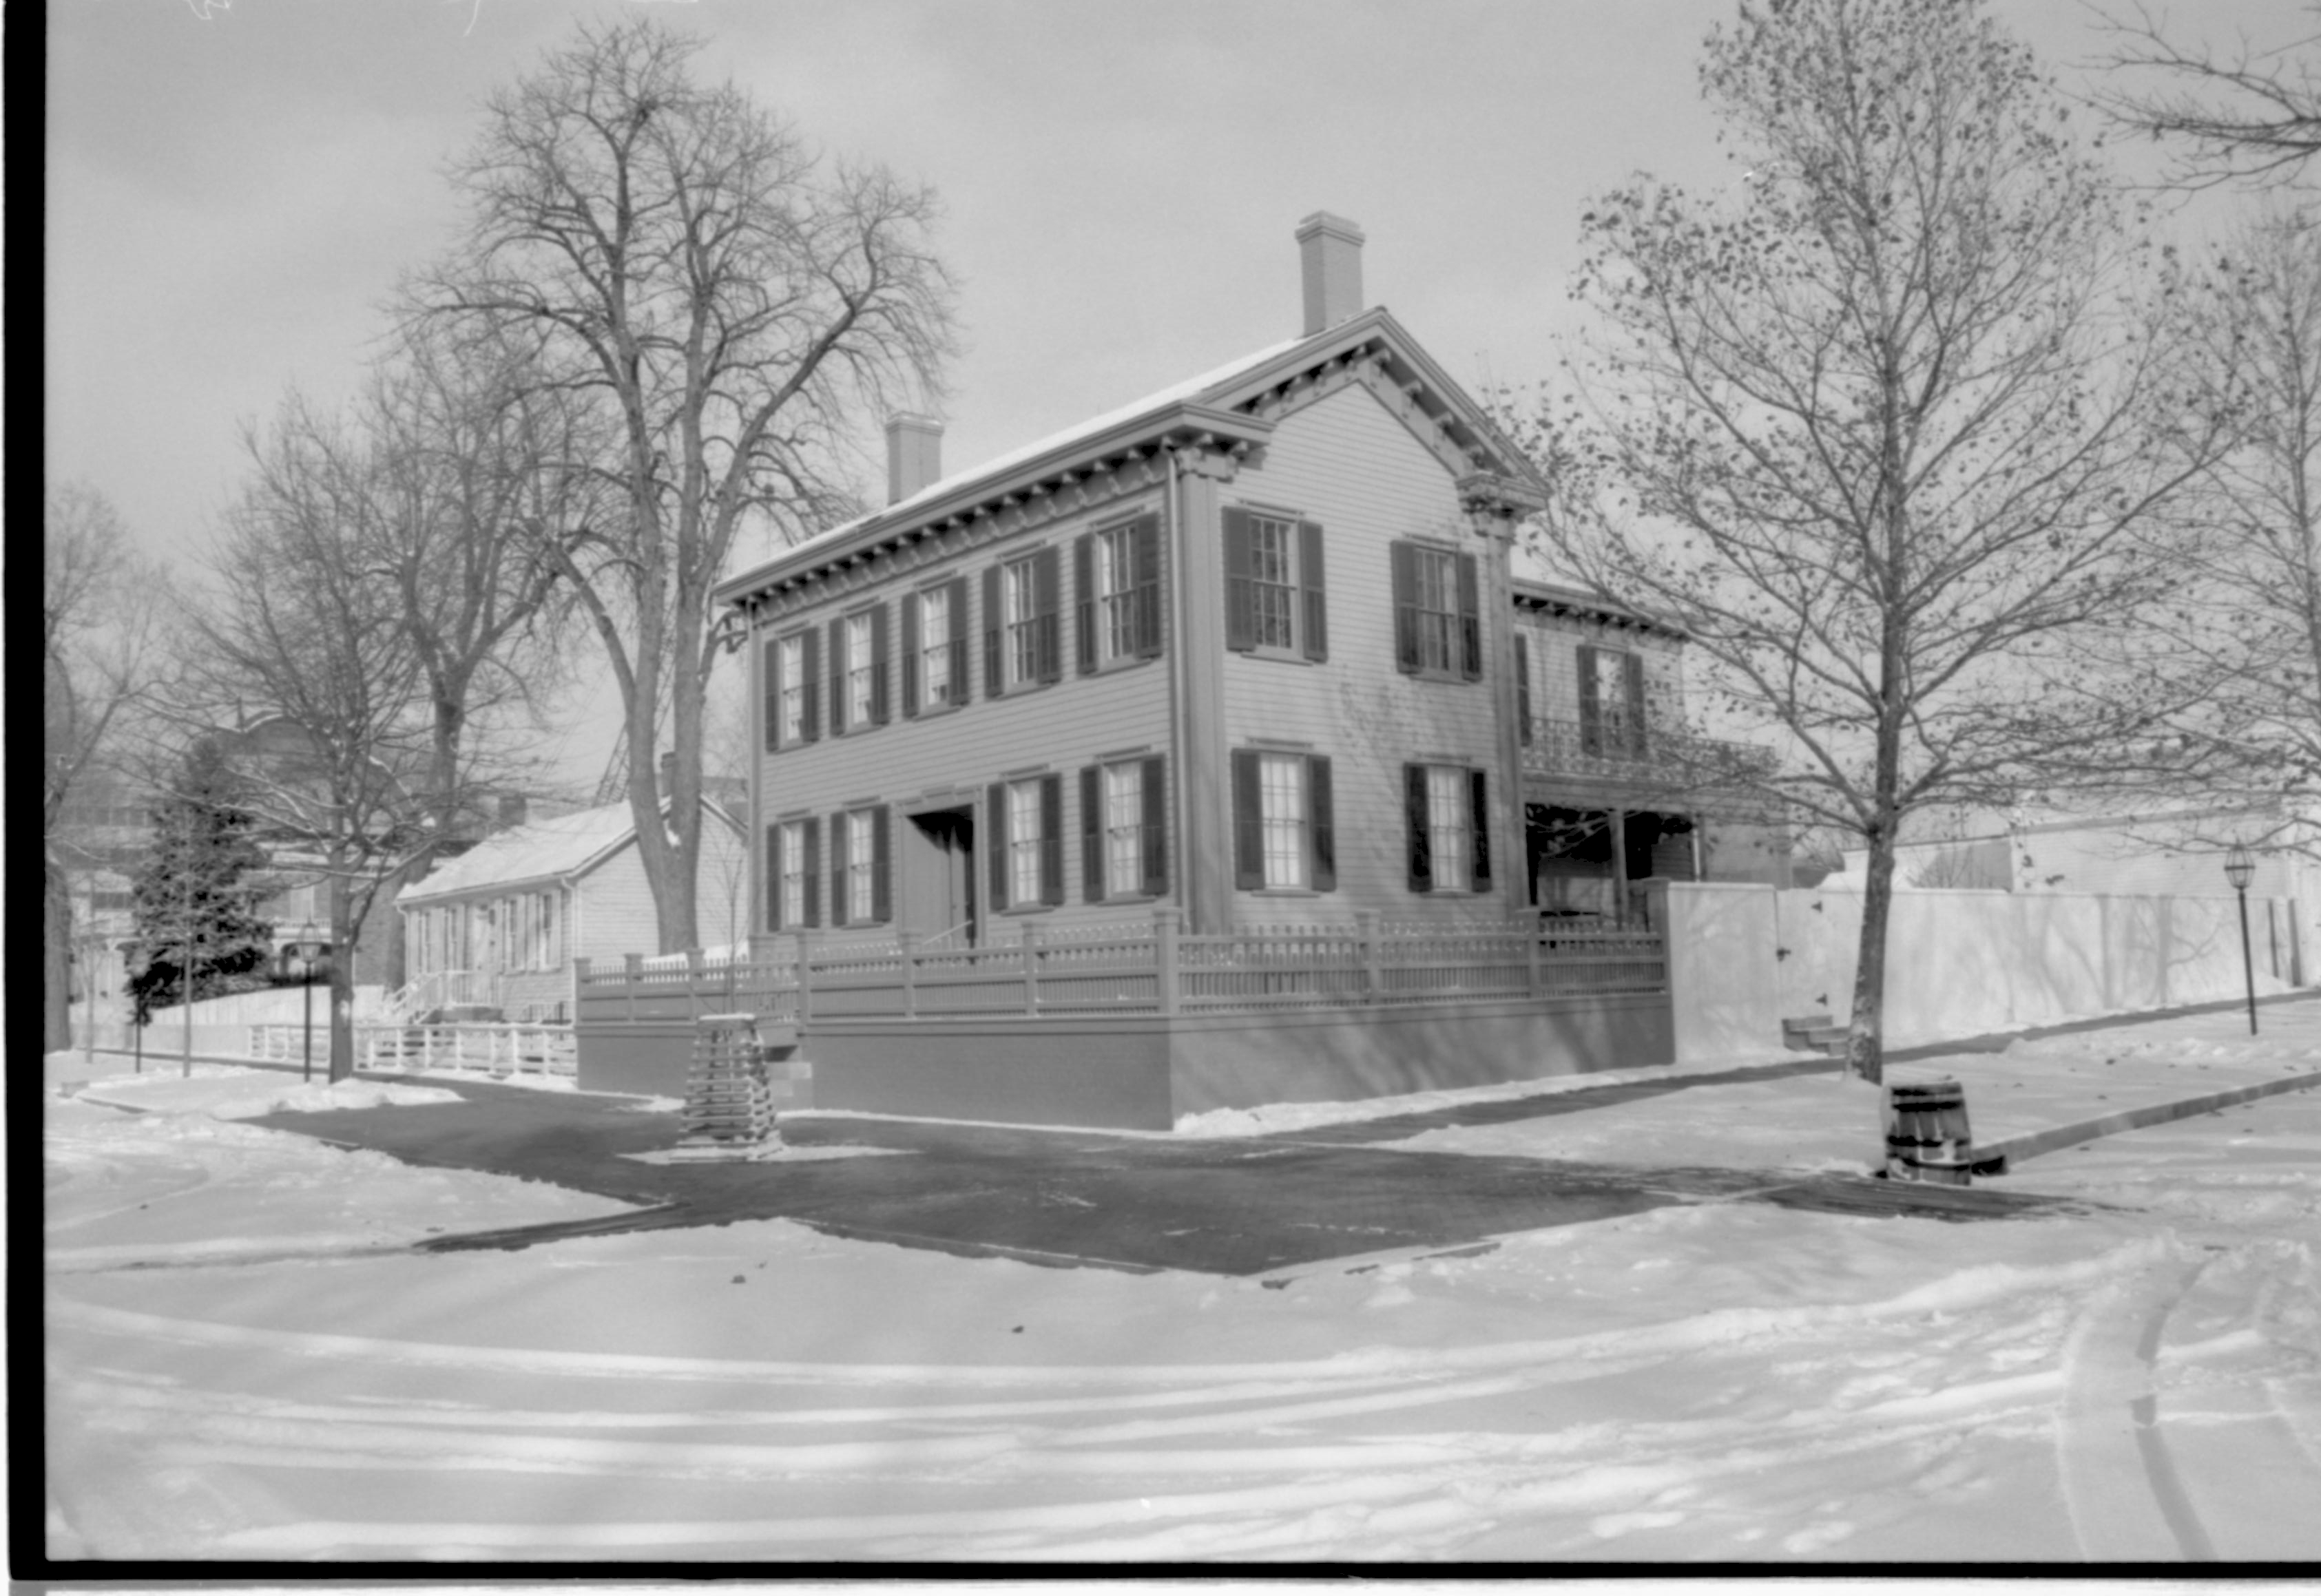 Lincoln Home in snow, cleared brick plaza in front, elm tree in cage on plaza.  Corneau House on left, Conference Center in brick on far left. Lincoln Barn and Woodshed on right behind fence. Trash barrel in gutter along Jackson Street. Maintenance vehicle tracks visible in streets Looking Northeast from 8th and Jackson Street intersection snow, Lincoln Home, Corneau, Lincoln Barn, Lincoln Woodshed, Conference Center, brick plaza, elm tree, fence